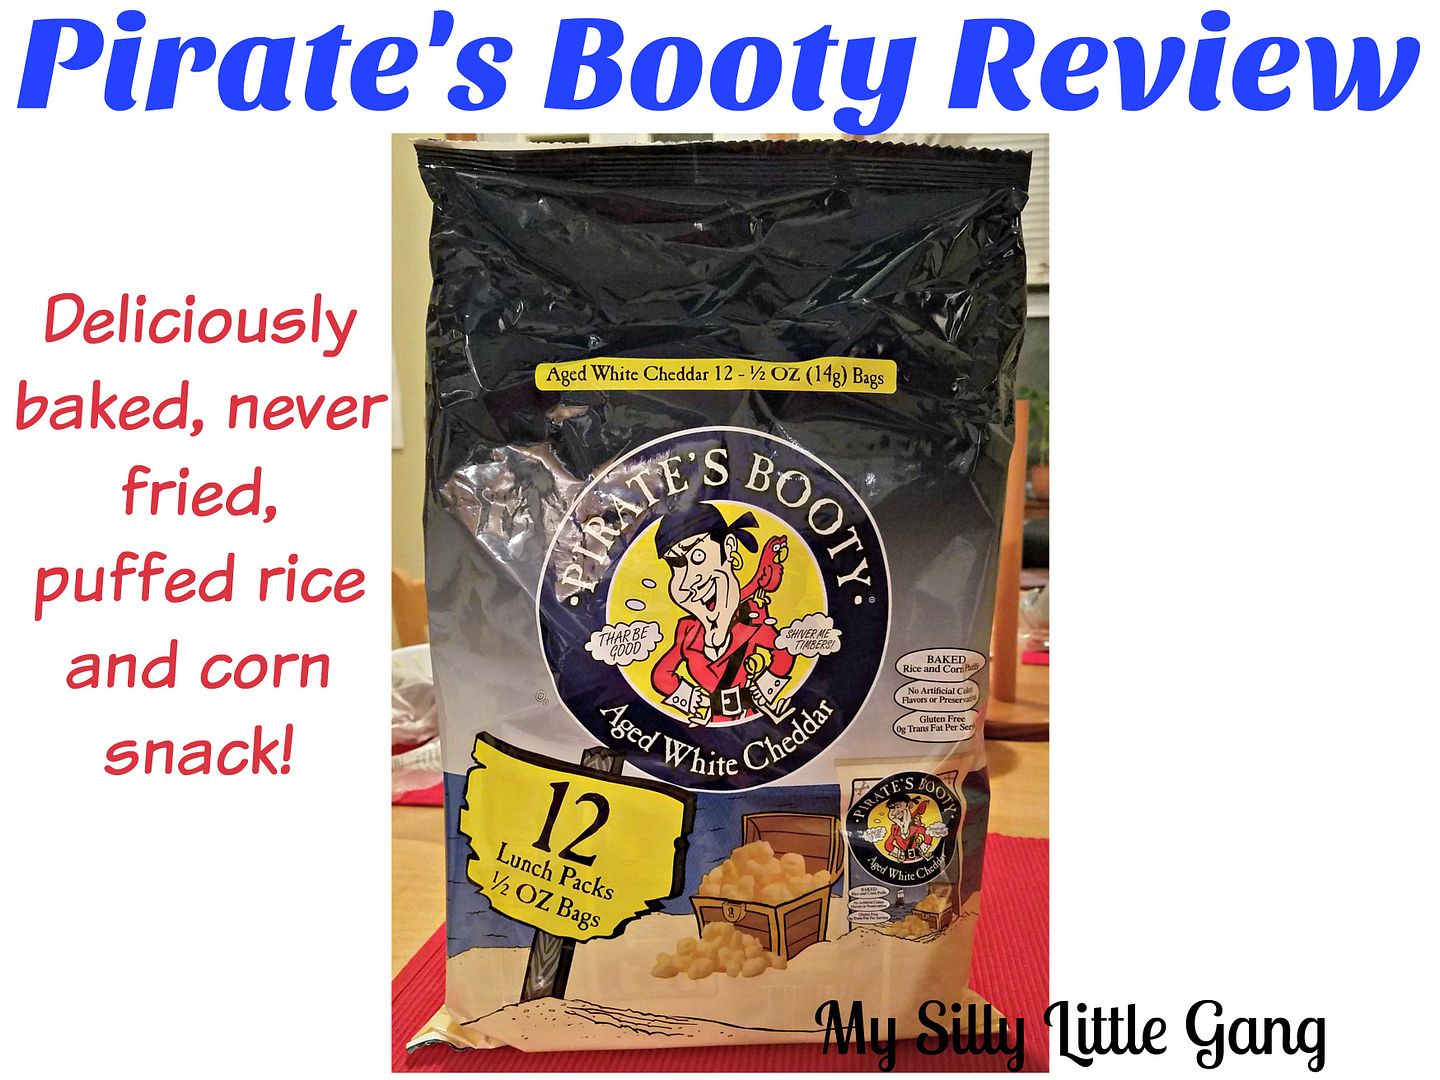 pirate's booty review